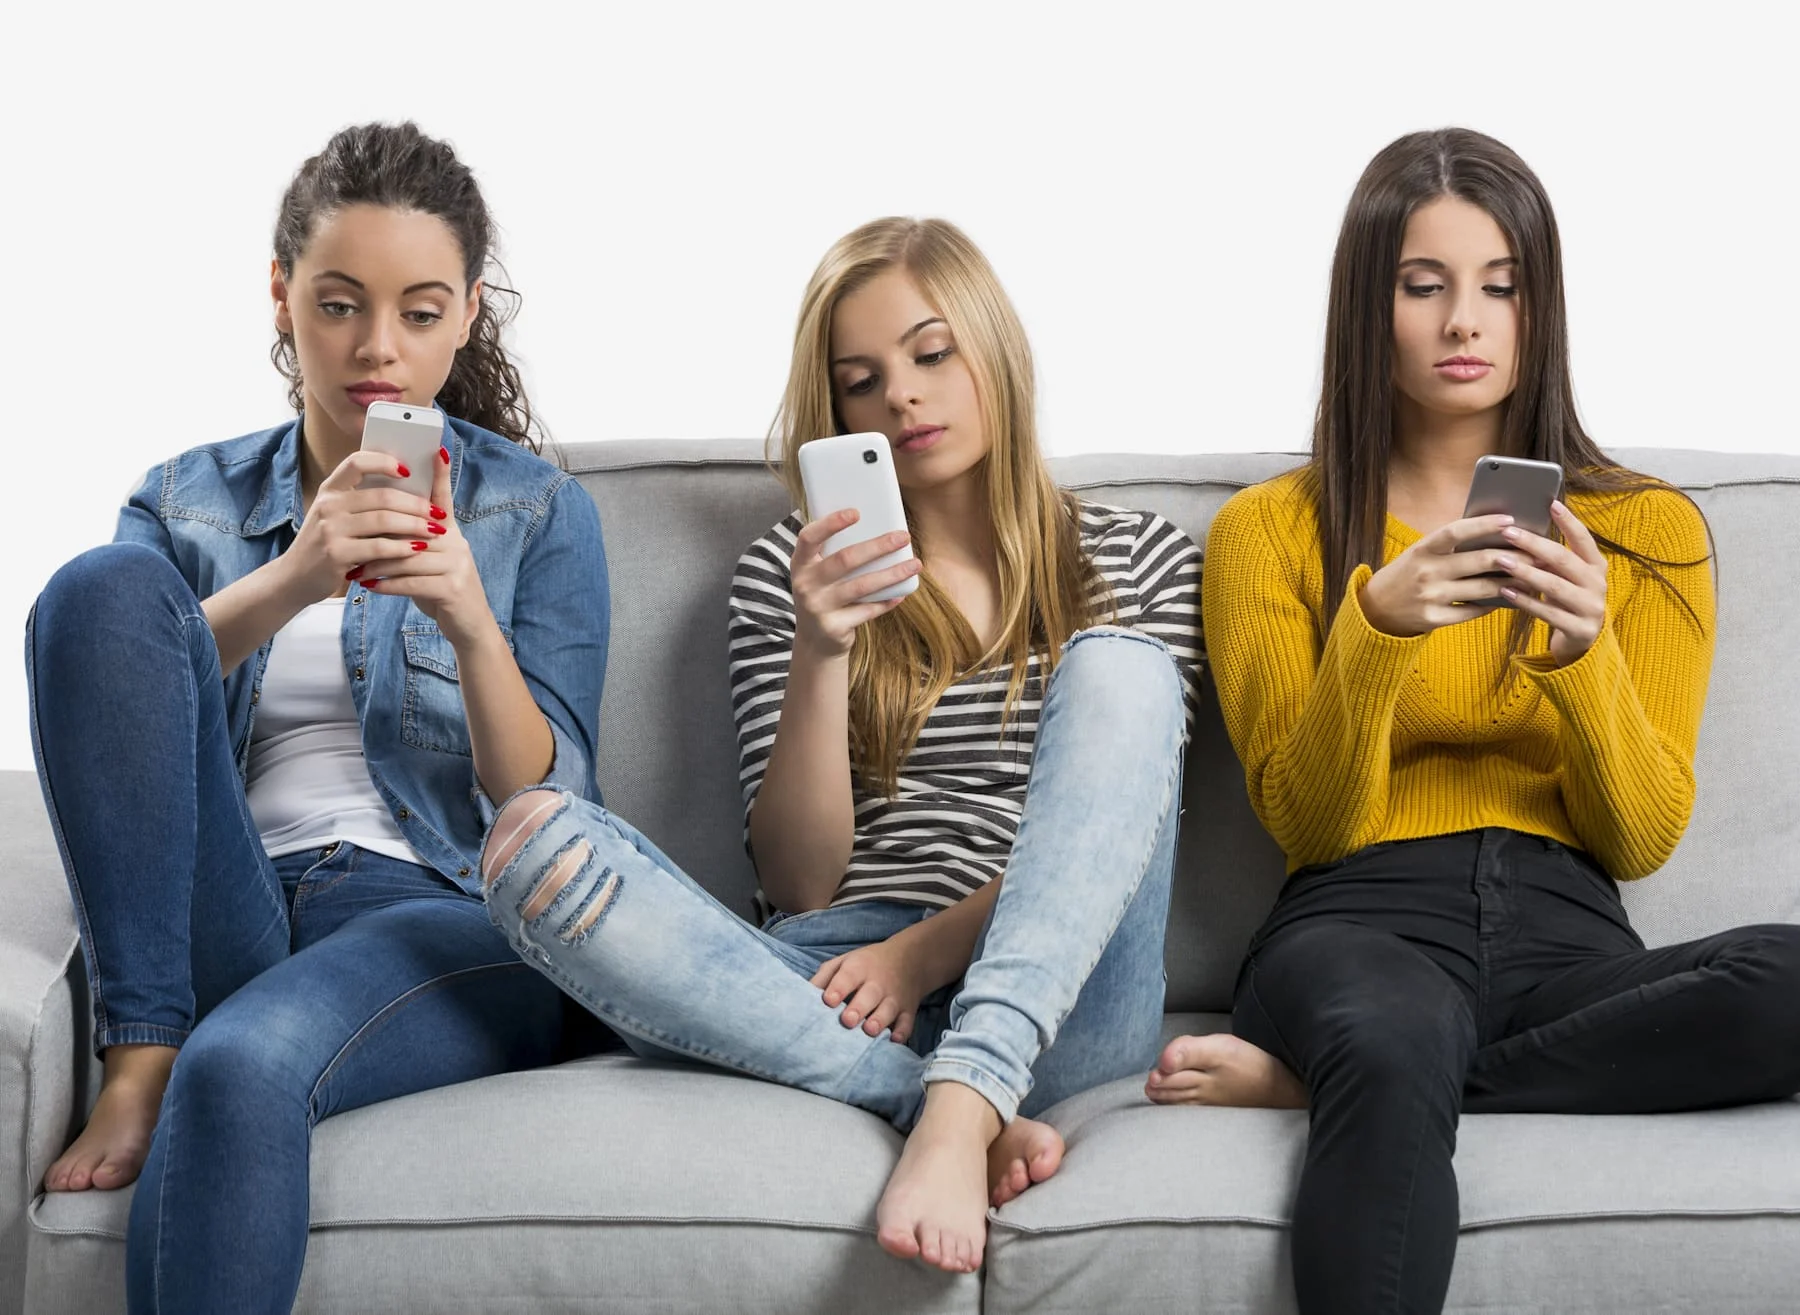 3 teens sitting on the couch on their phones looking bored